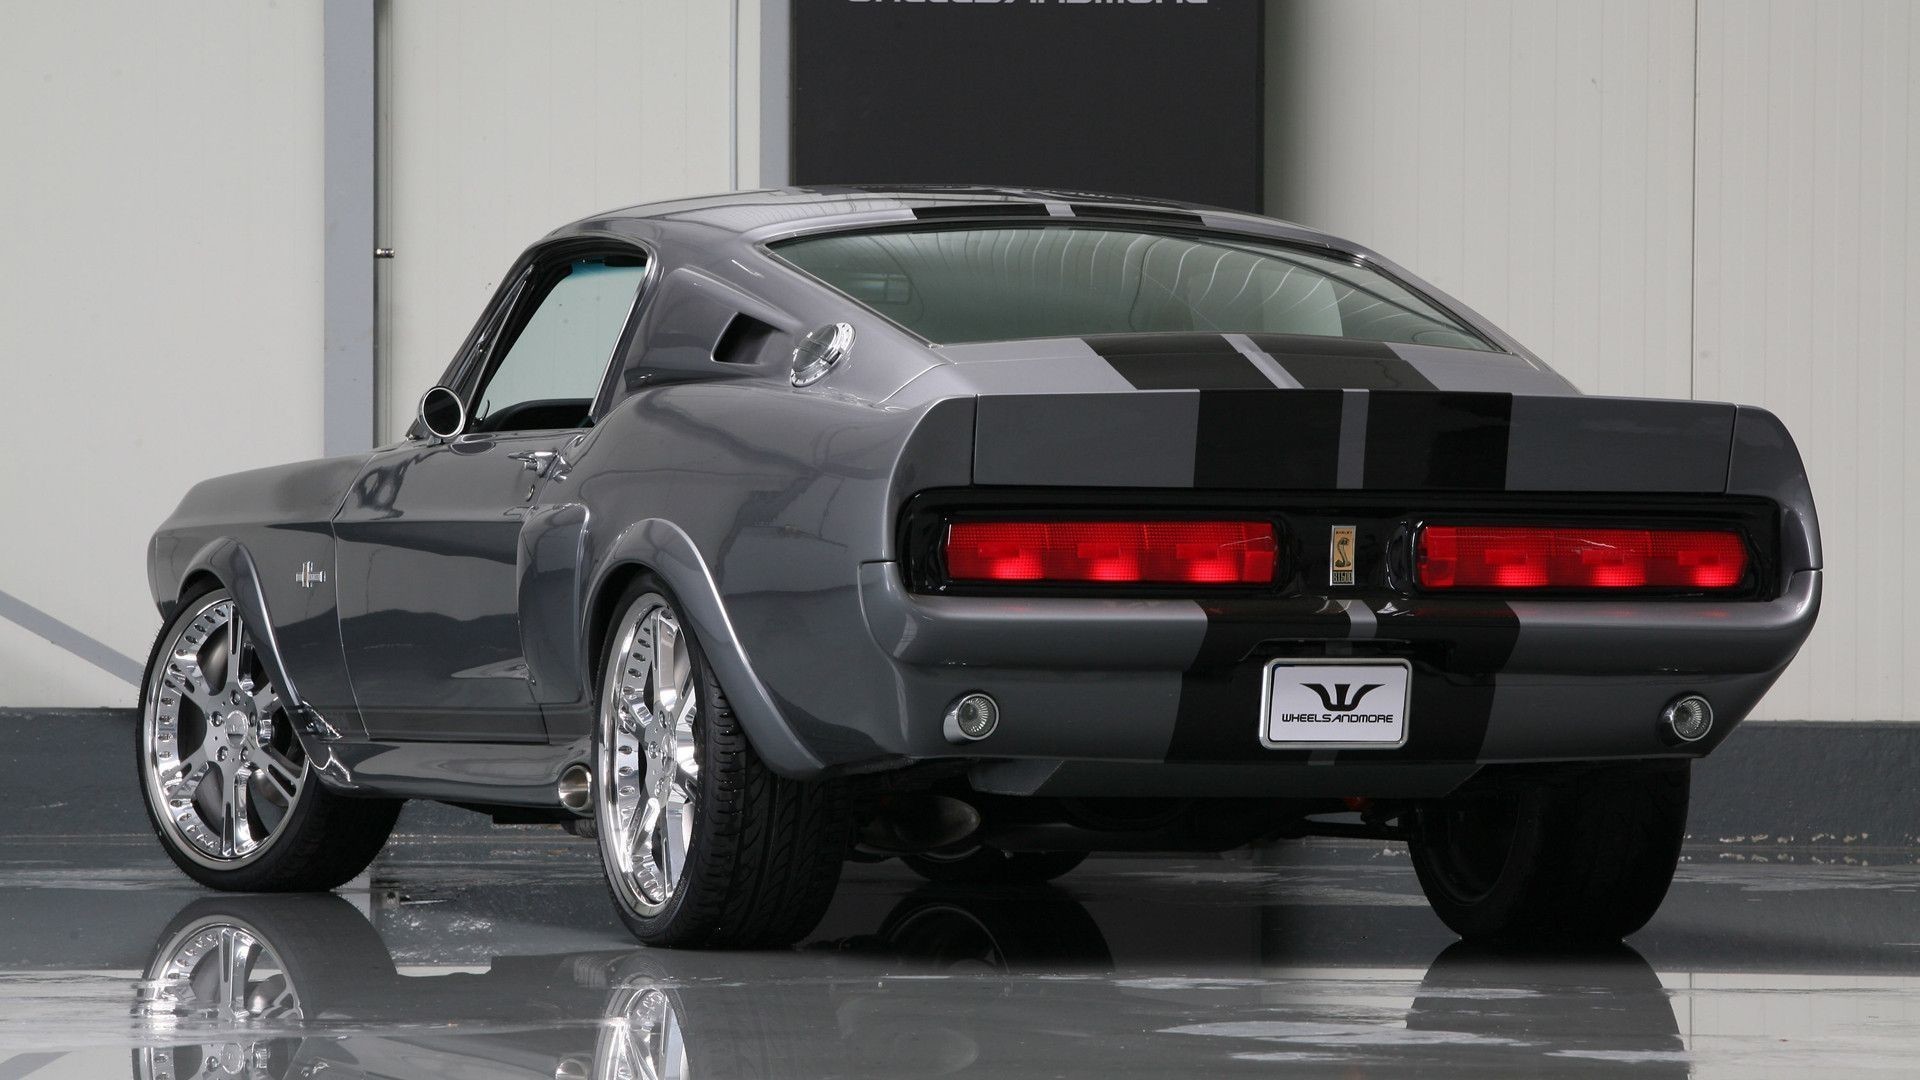 1920x1080 New 1967 Shelby Mustang Gt500 Wallpaper Price and Release date